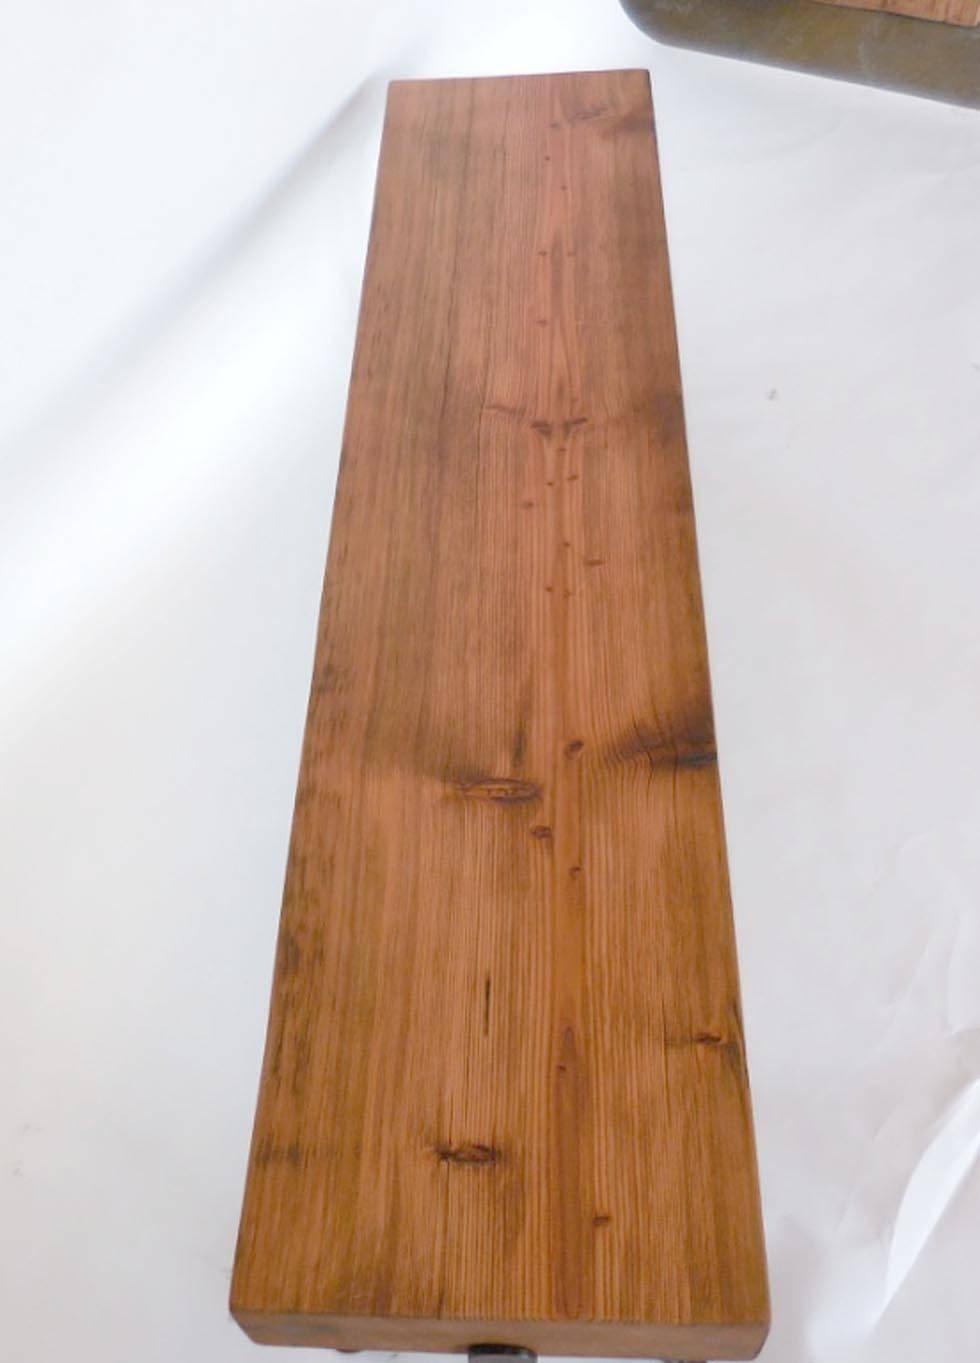 Reclaimed natural 100 year old Douglas fir beams atop hand-forged iron base. Can be made in custom sizes.  Made in Los Angeles by Dos Gallos studio.